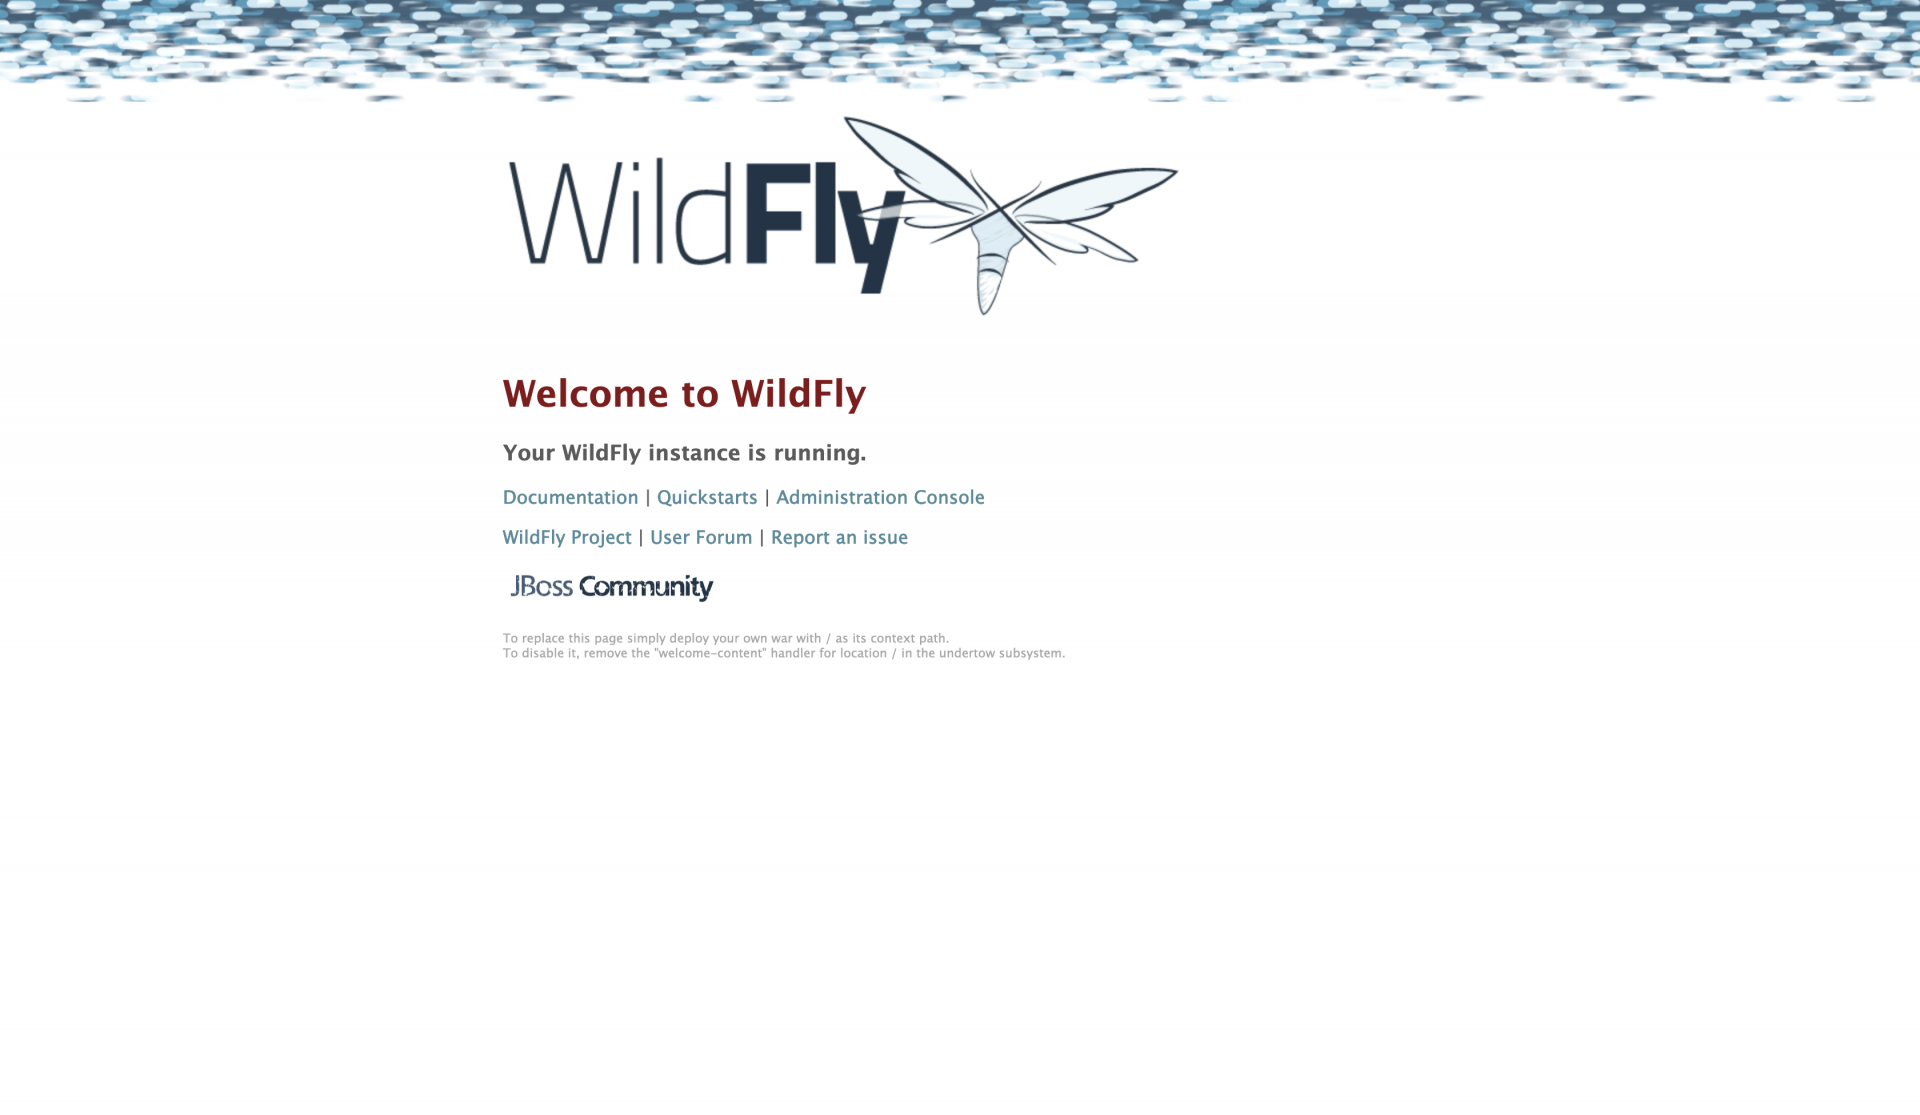 Wildfly home page - Java Enterprise Edition (JEE)